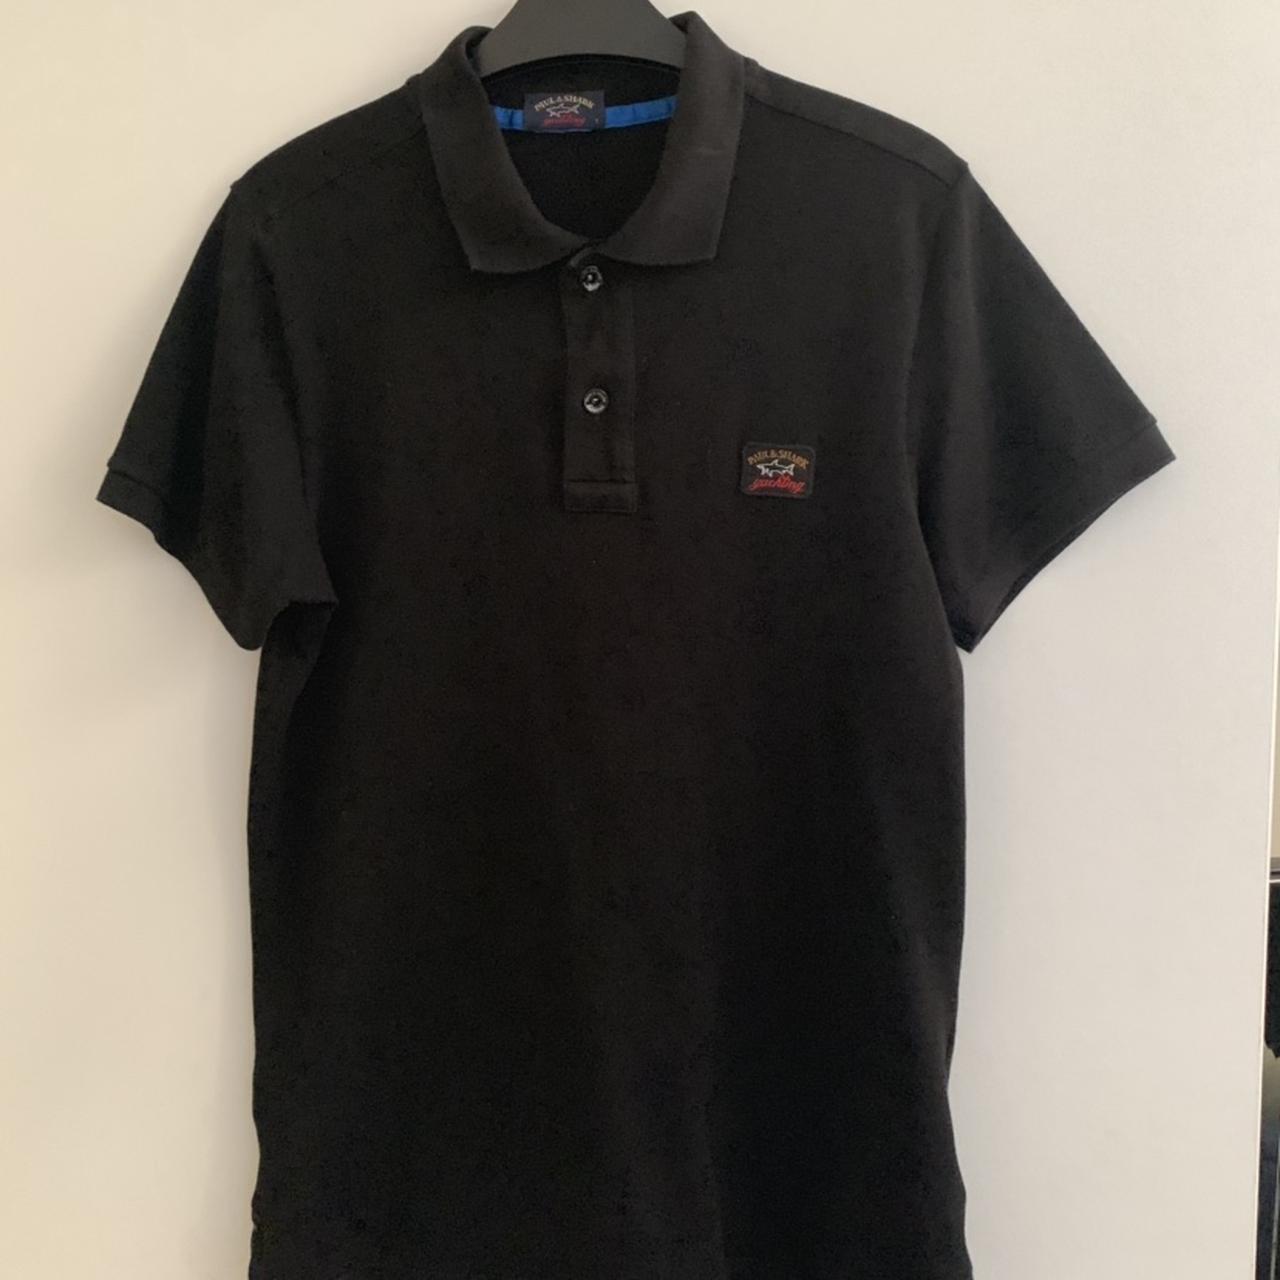 Paul & shark polo, size small, 10/10 condition, worn... - Depop